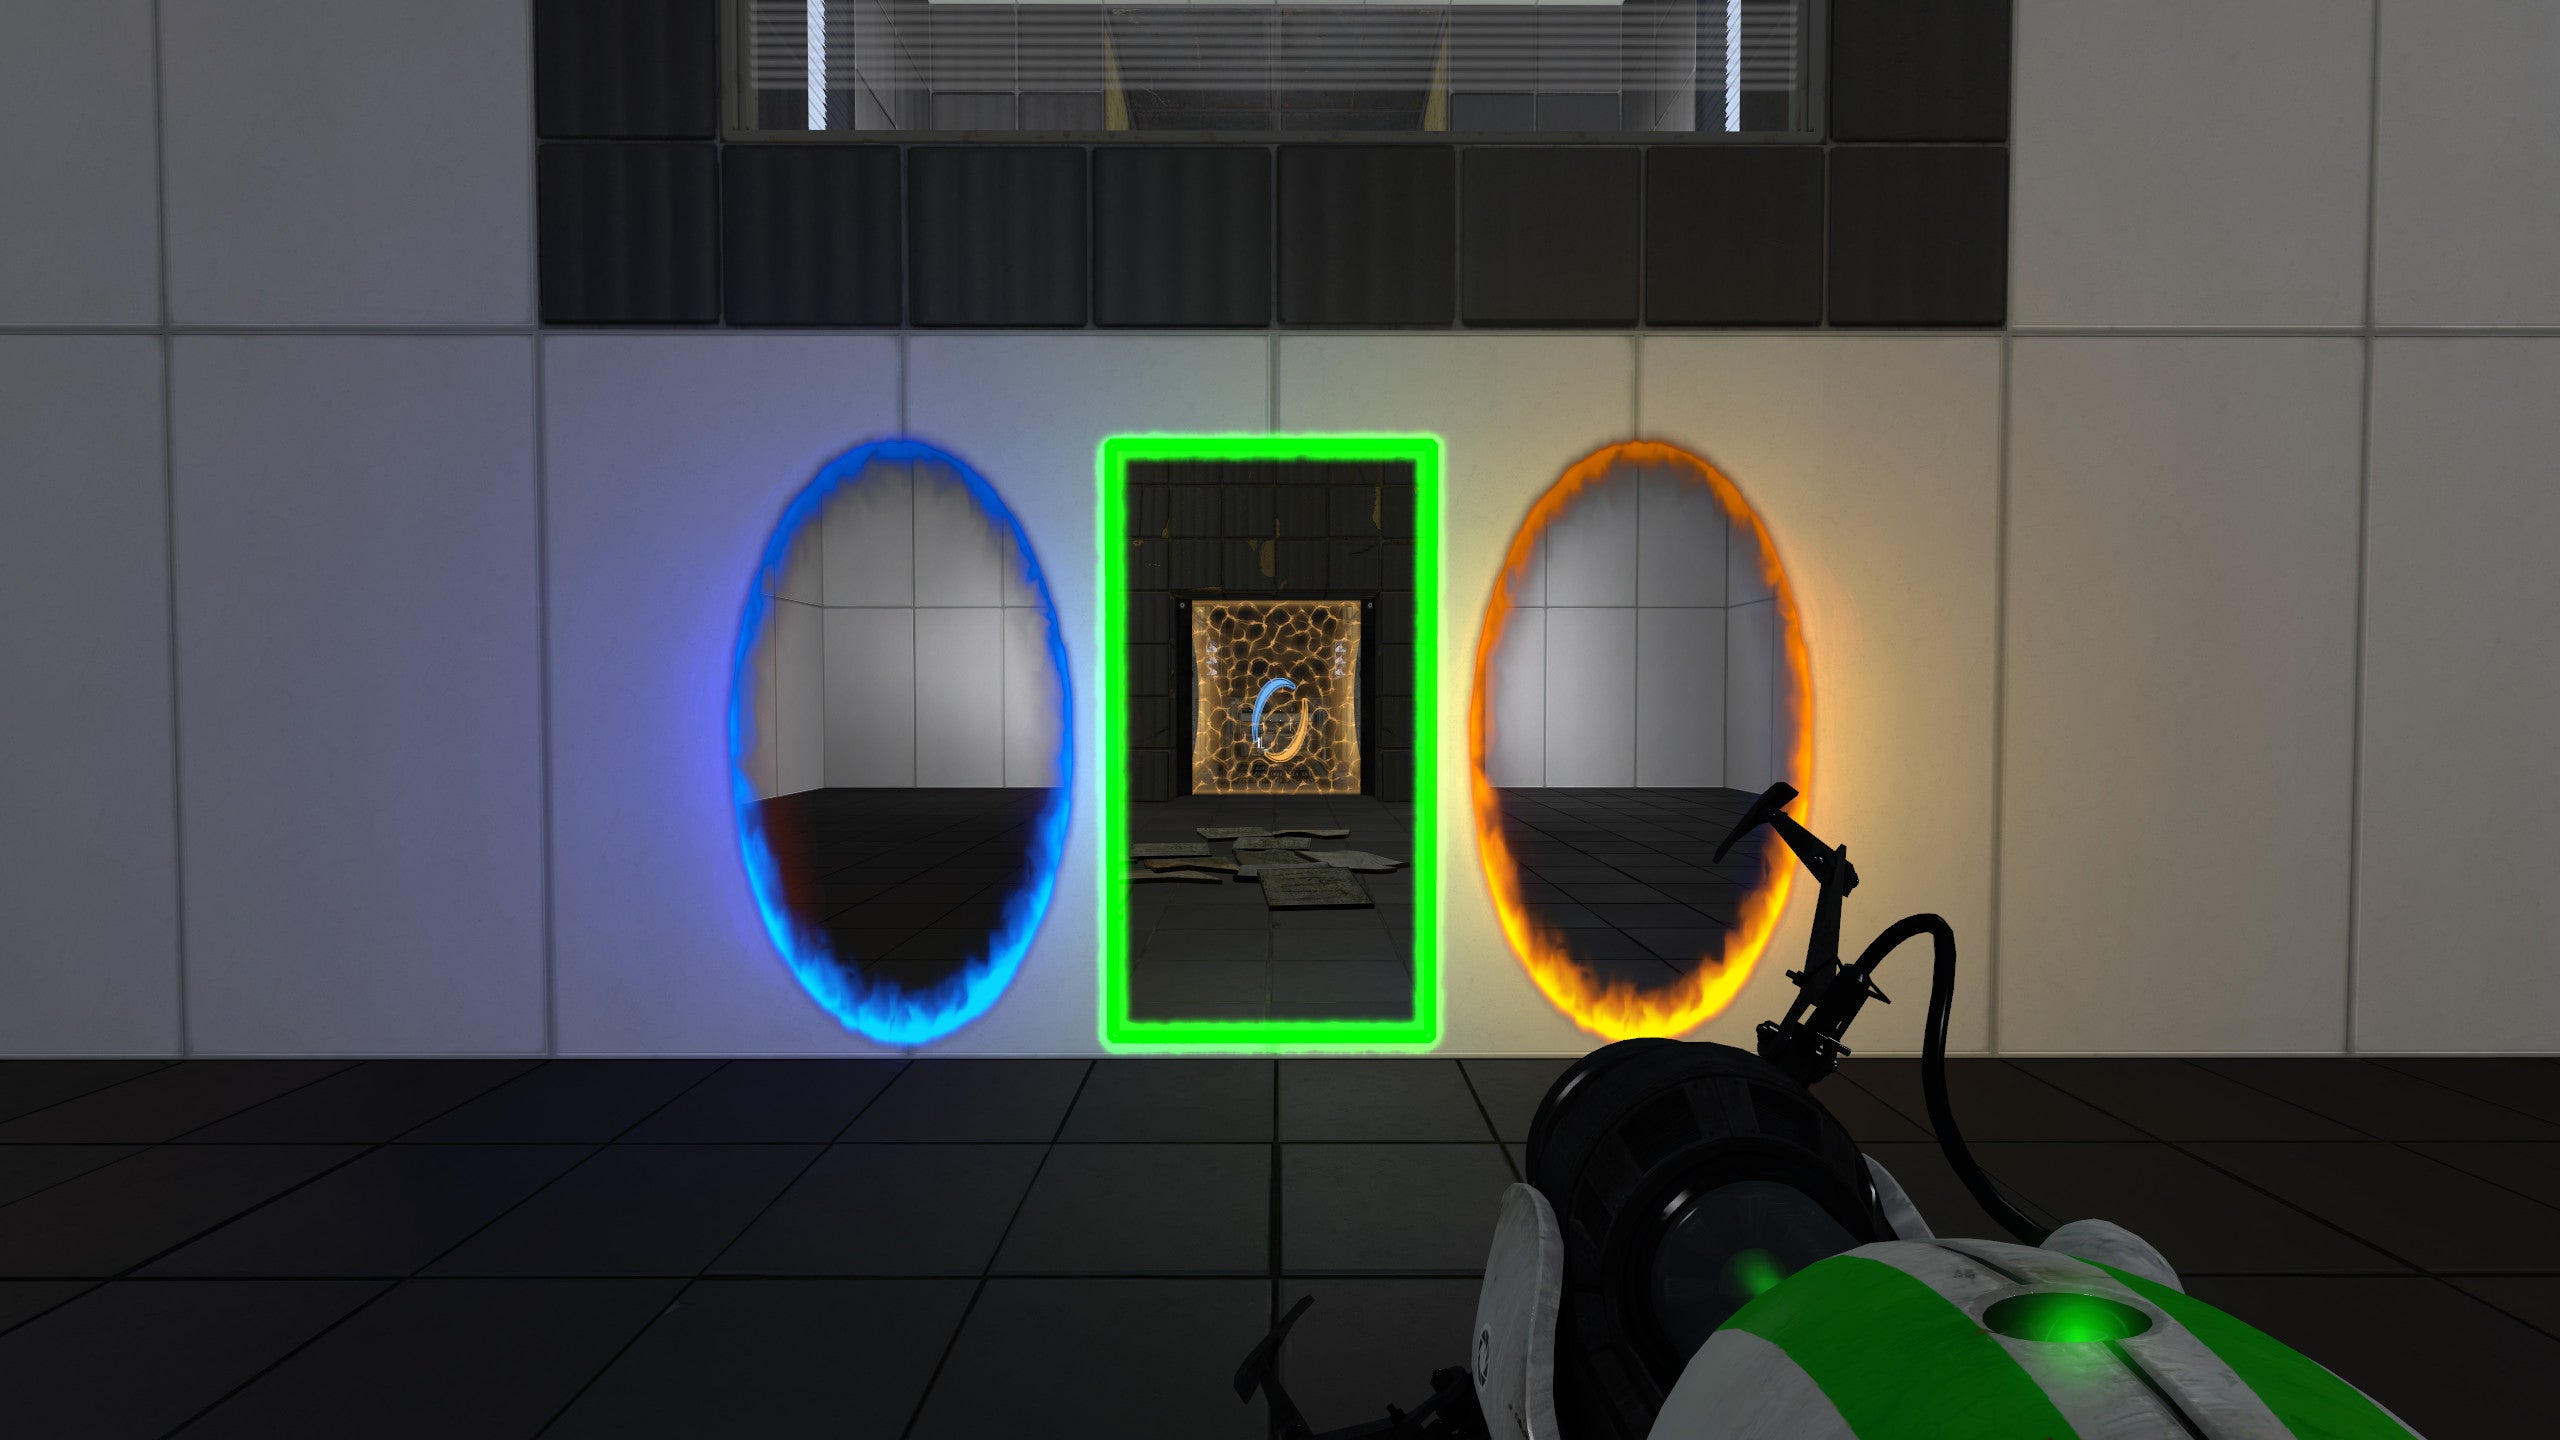 Portal Reloaded mod - A player holding a portal gun looks at a wall with three portals: blue, orange, and green.